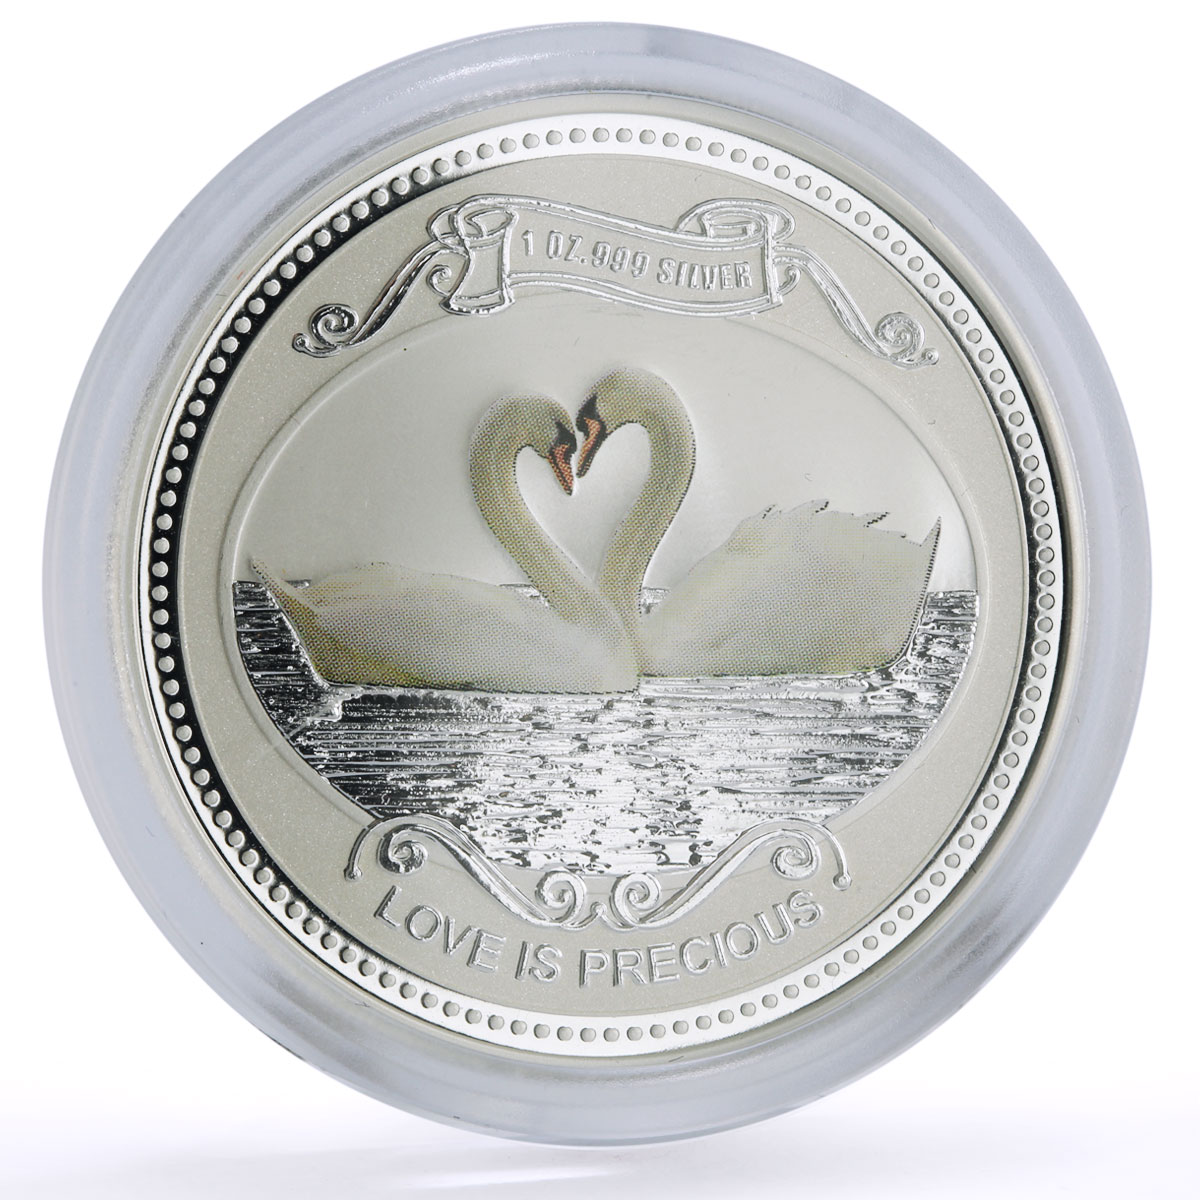 Cook Islands 2 dollars Love is Precious Swans Birds colored silver coin 2008